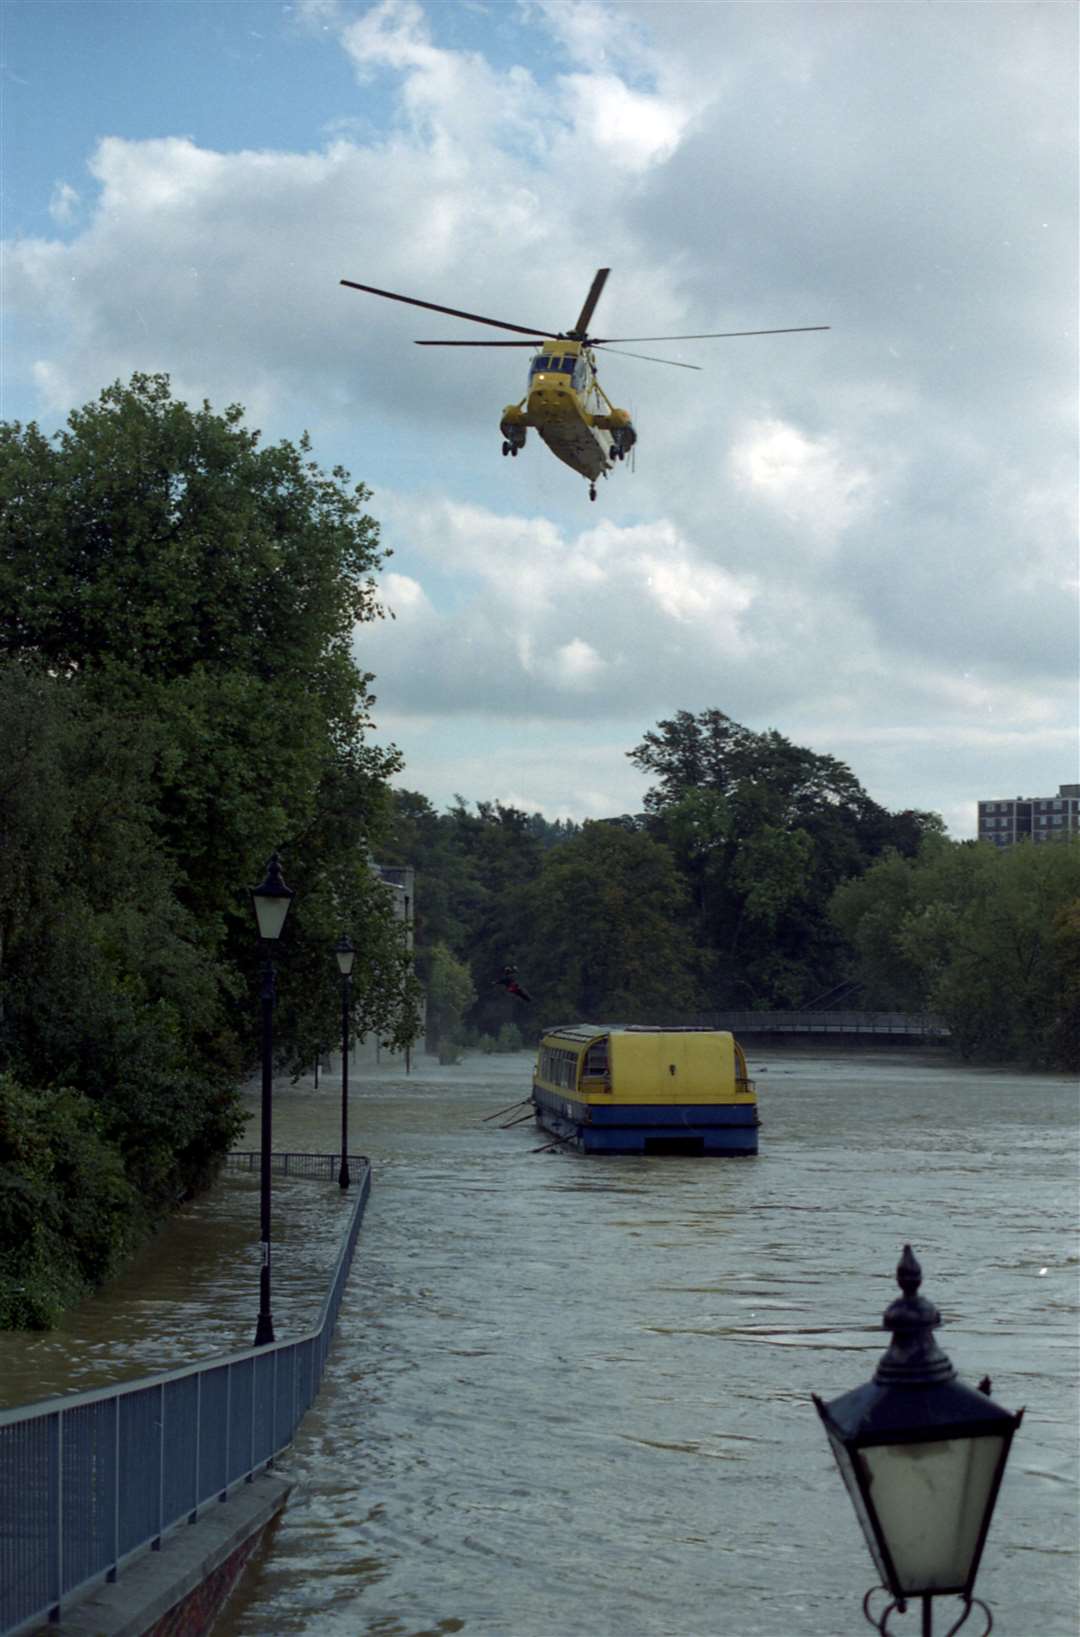 A rescue helicopter above The Kentish Lady pleasure boat in Maidstone. Picture: Barry Duffield